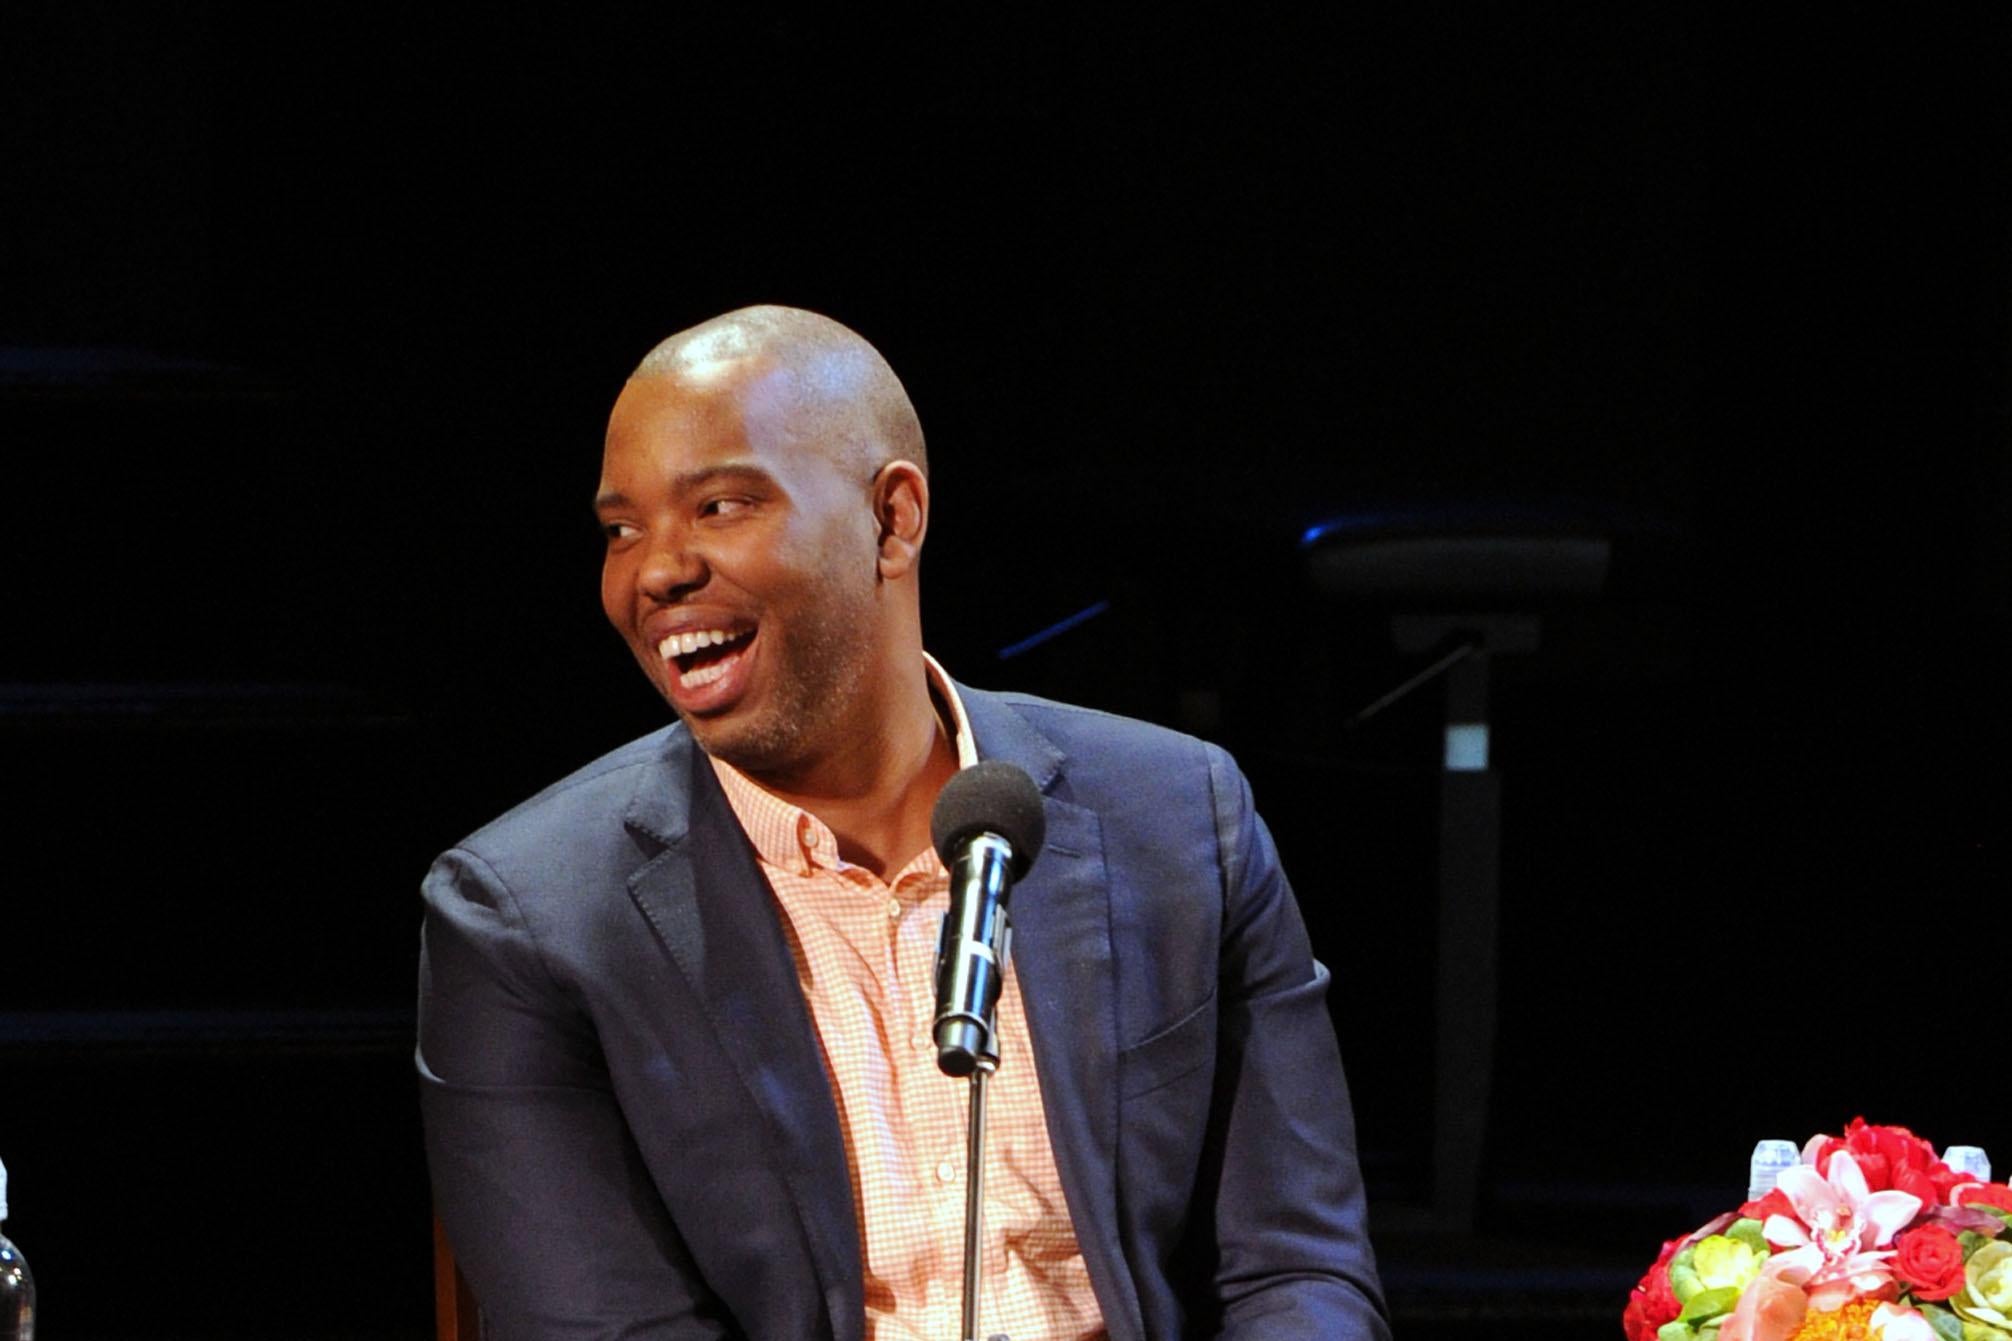 NEW YORK, NY - JUNE 15:  Ta-Nehisi Coates attends Art & Social Activism, a discussion on Broadway with Ta-Nehisi Coates, Toni Morrison and Sonia Sanchez on June 15, 2016 in New York City.  (Photo by Craig Barritt/Getty Images for The Stella Adler Studio of Acting)